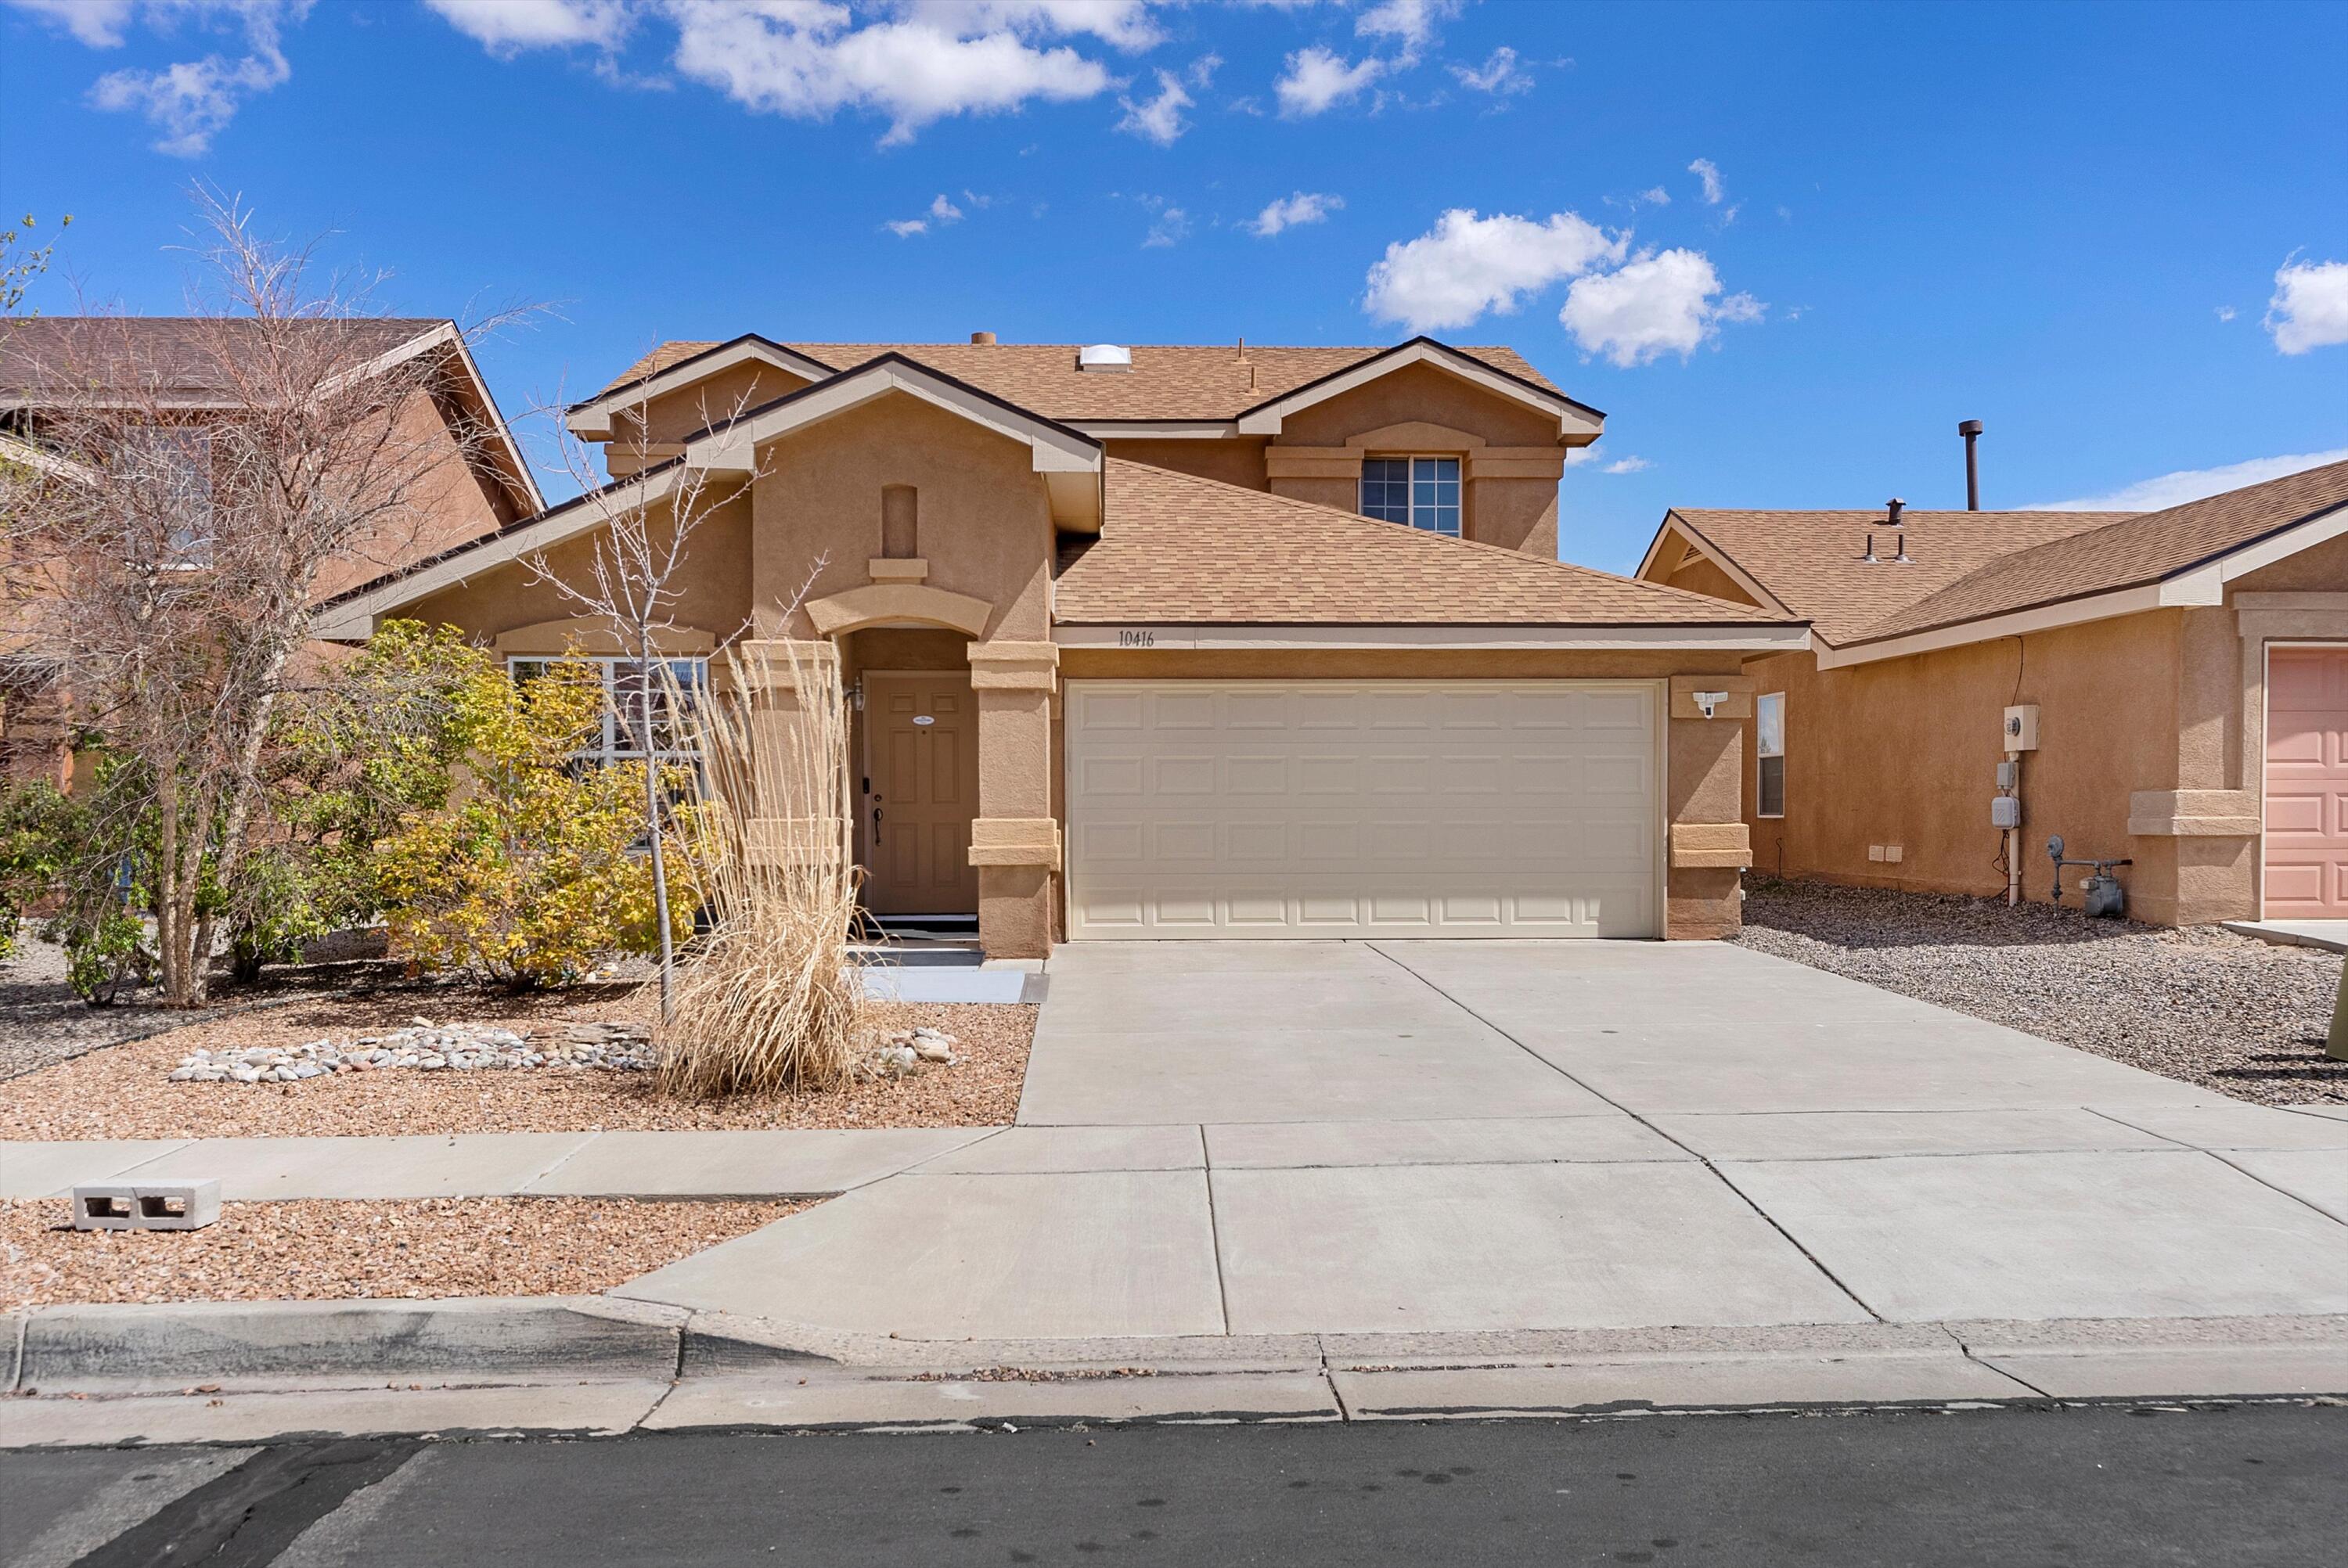 10416 Griffon Drive NW, Albuquerque, New Mexico 87114, 5 Bedrooms Bedrooms, ,3 BathroomsBathrooms,Residential,For Sale,10416 Griffon Drive NW,1059353